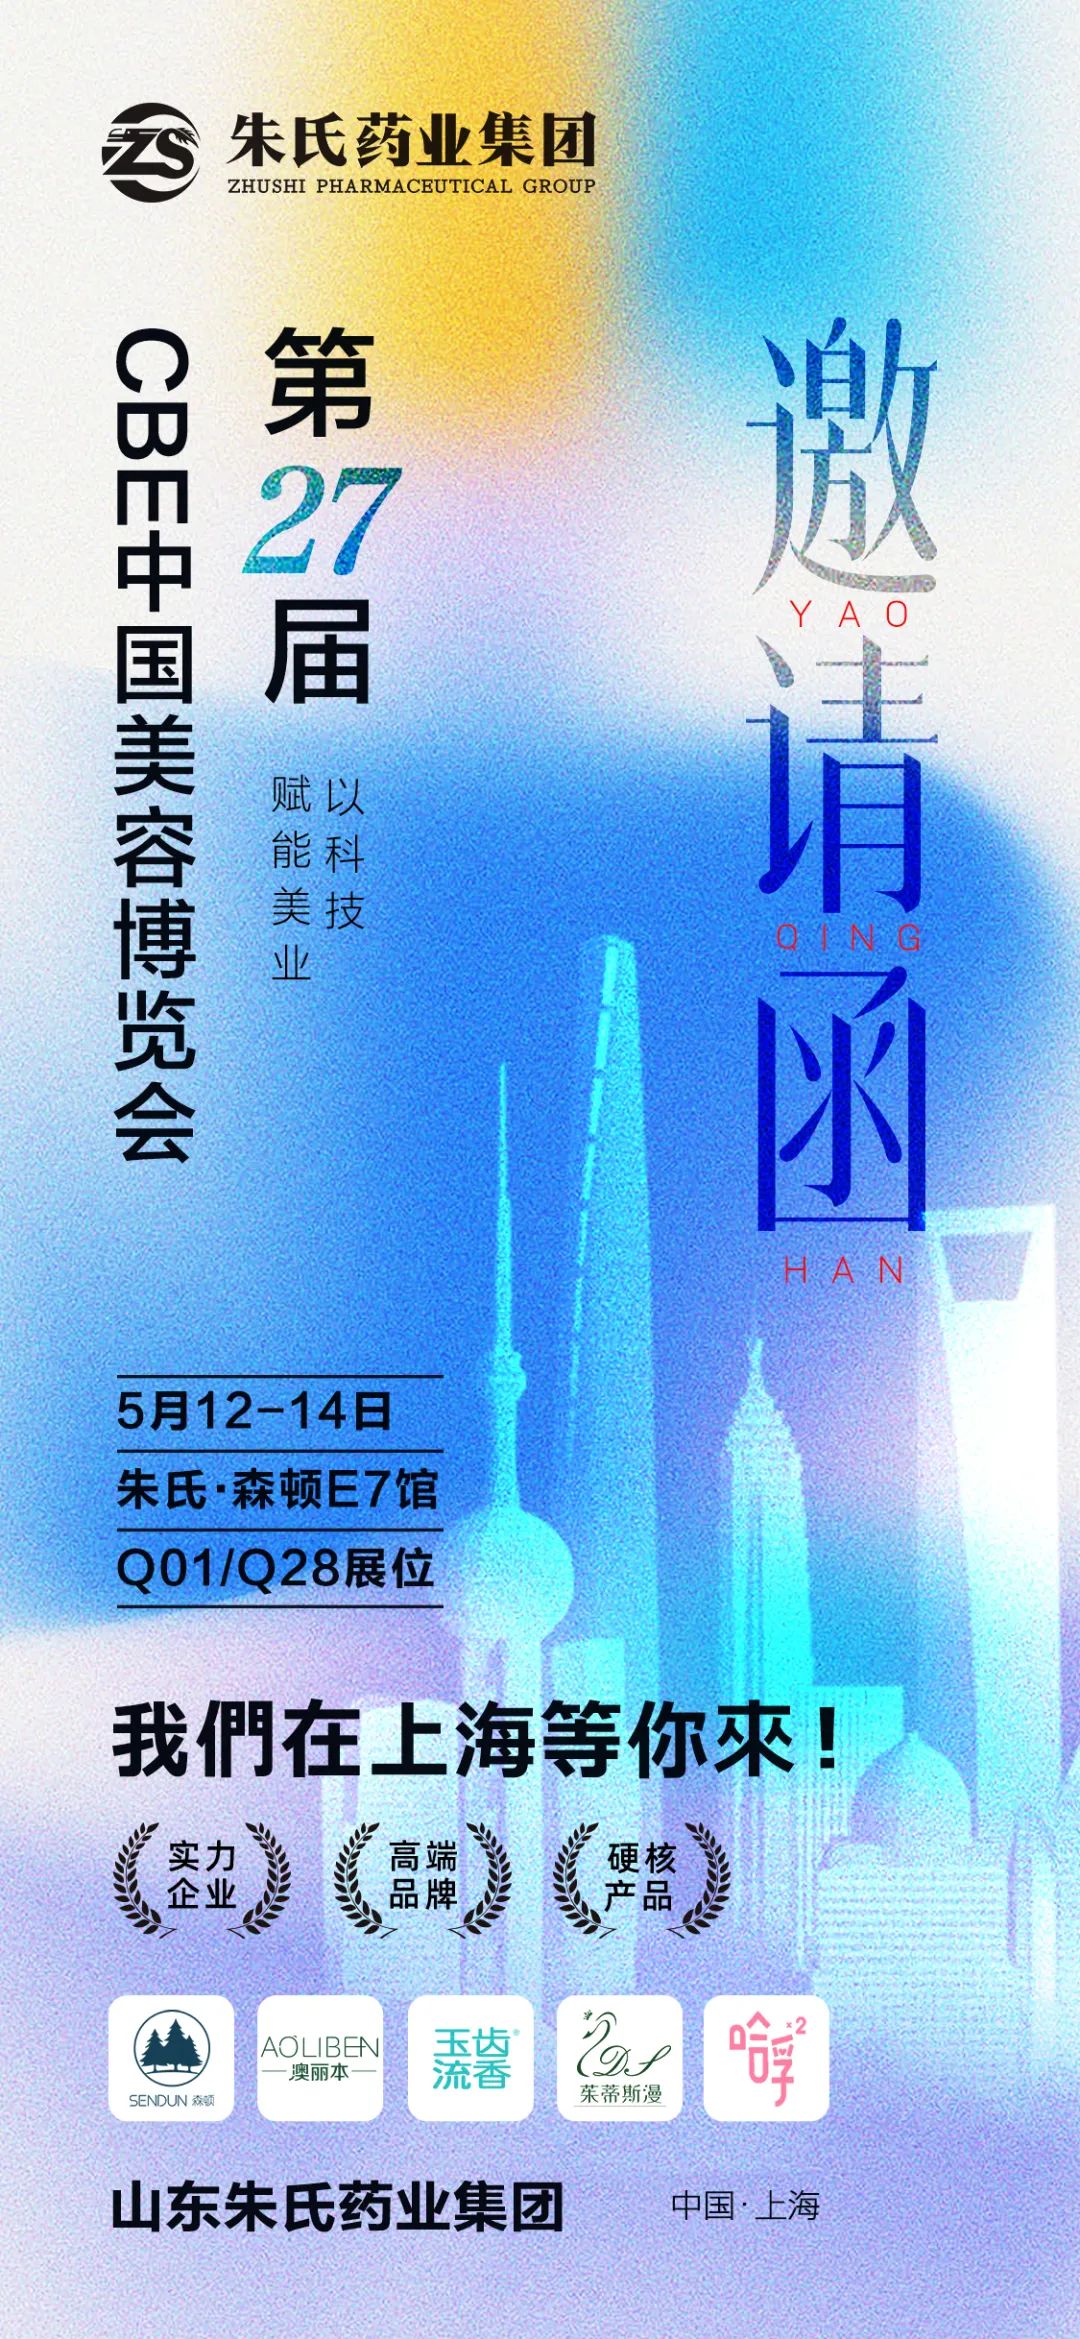 May 12-14, we are waiting for you in Shanghai!